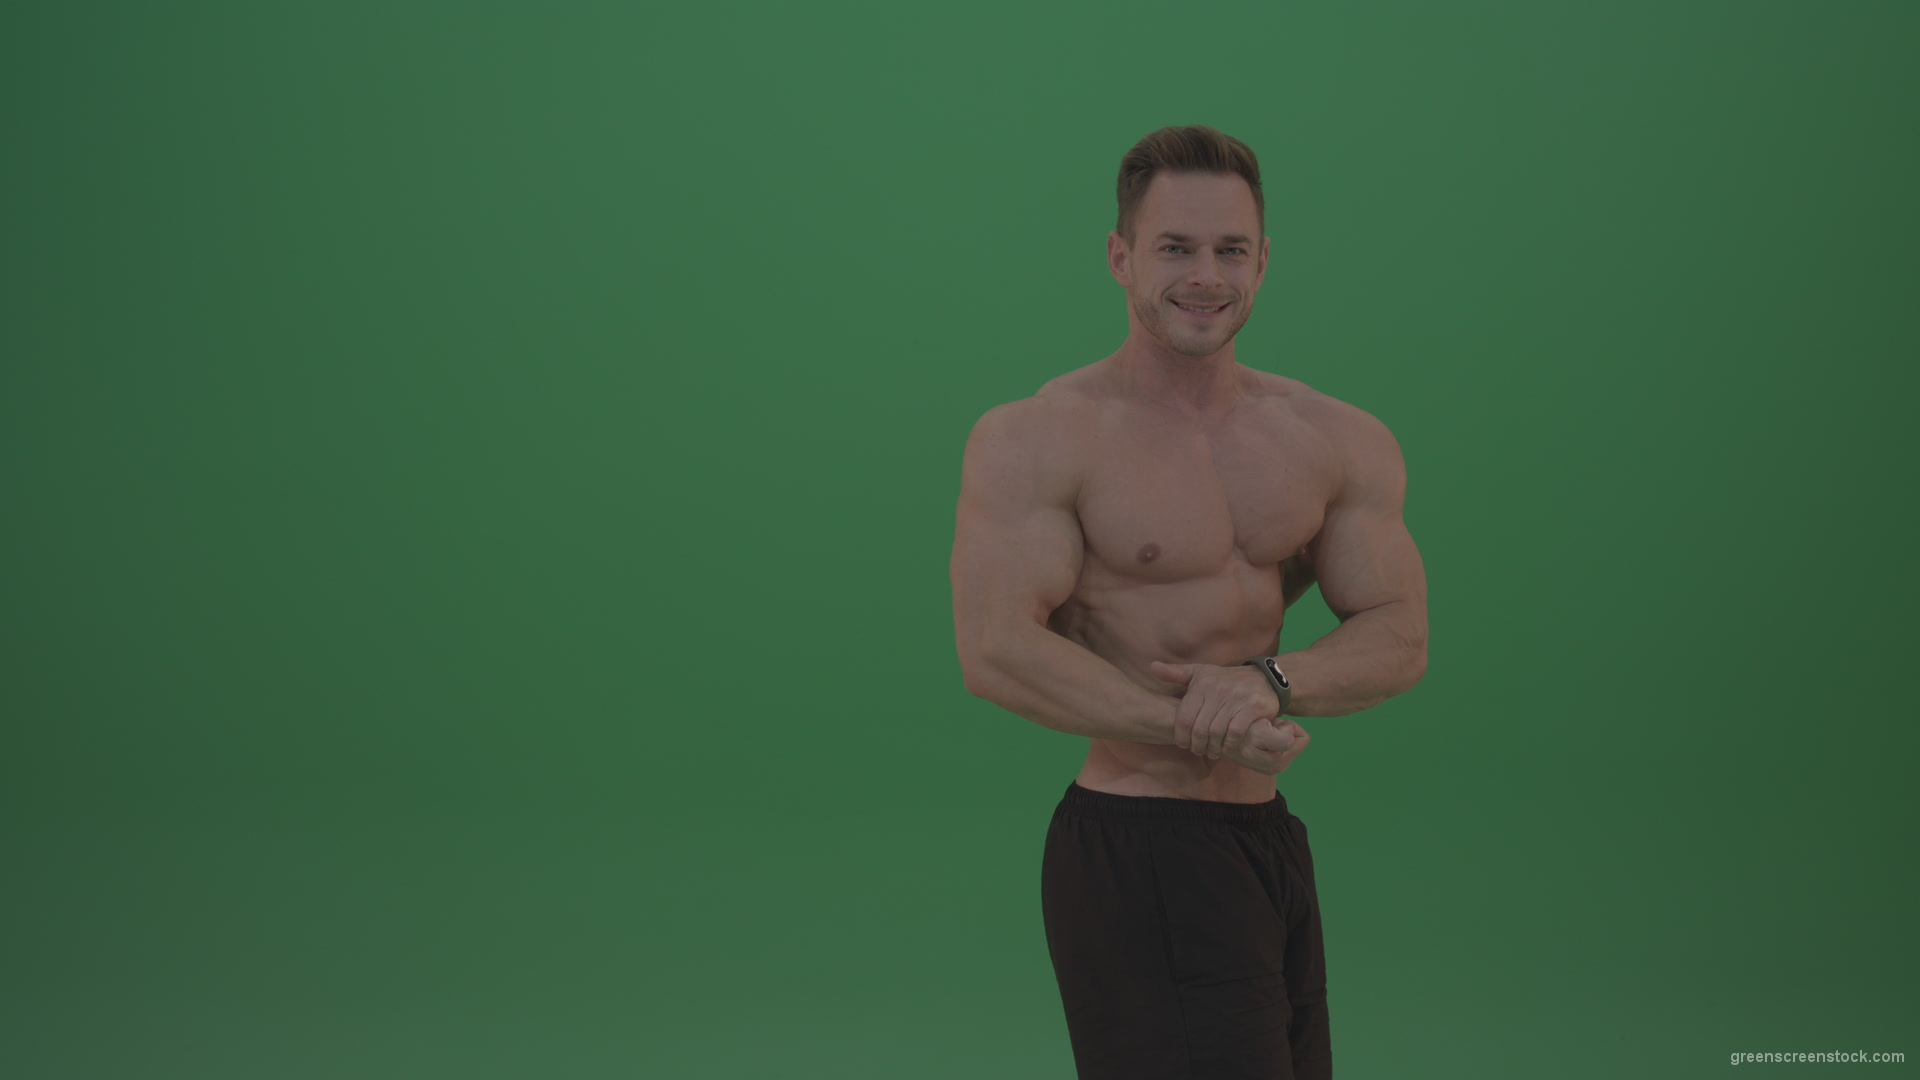 Green-Screen-Blone_Bodybuilder_Demonstrating_Front_Double_Biceps_And_Lateral_Spread_Positions_On_Green_Screen_Wall_Background_009 Green Screen Stock